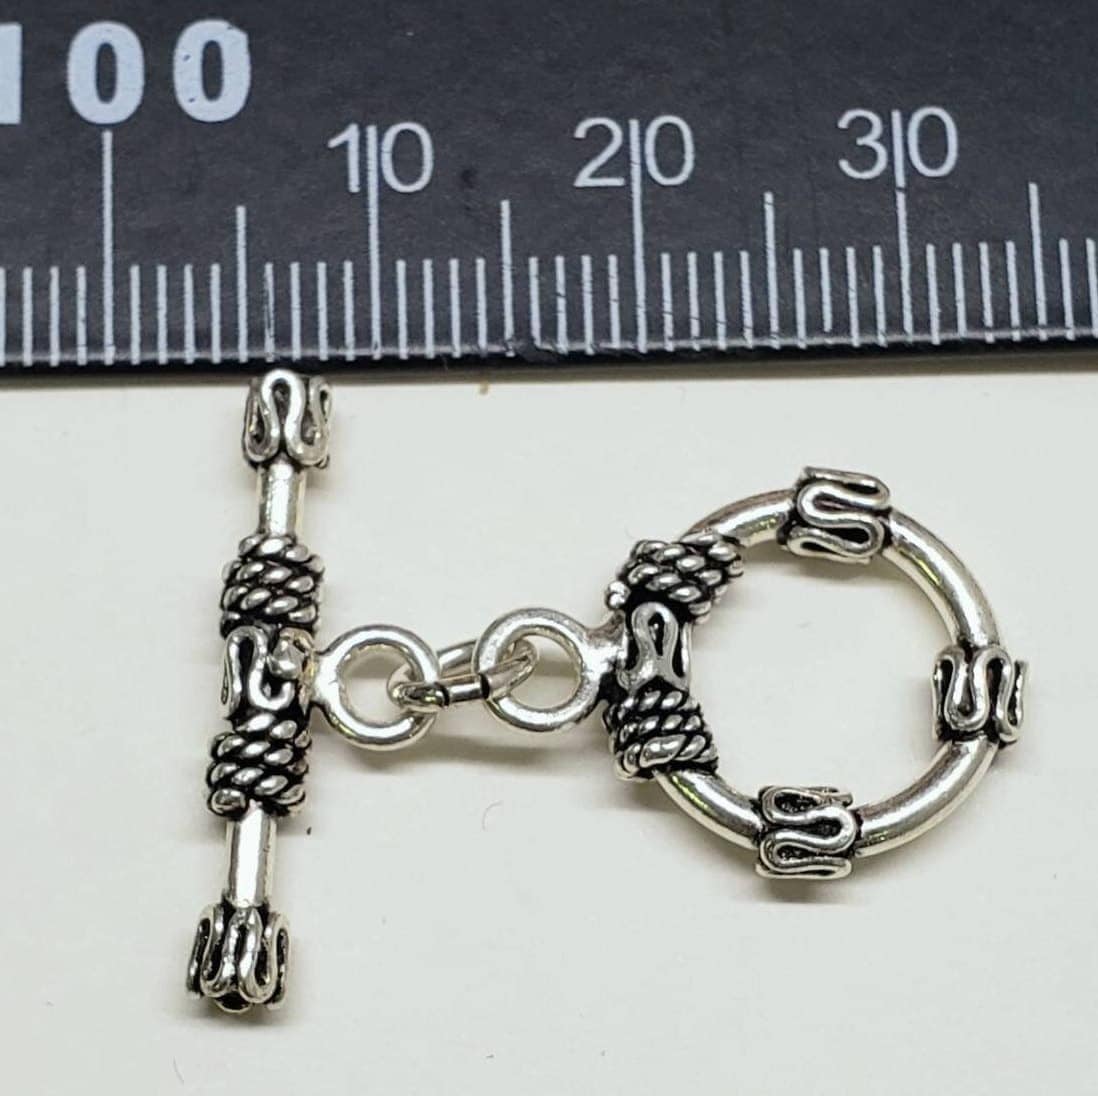 Sterling silver bali toggle clasp, heavy weight 15mm round vintage handmade designed jewelry making toggle clasp, 1set